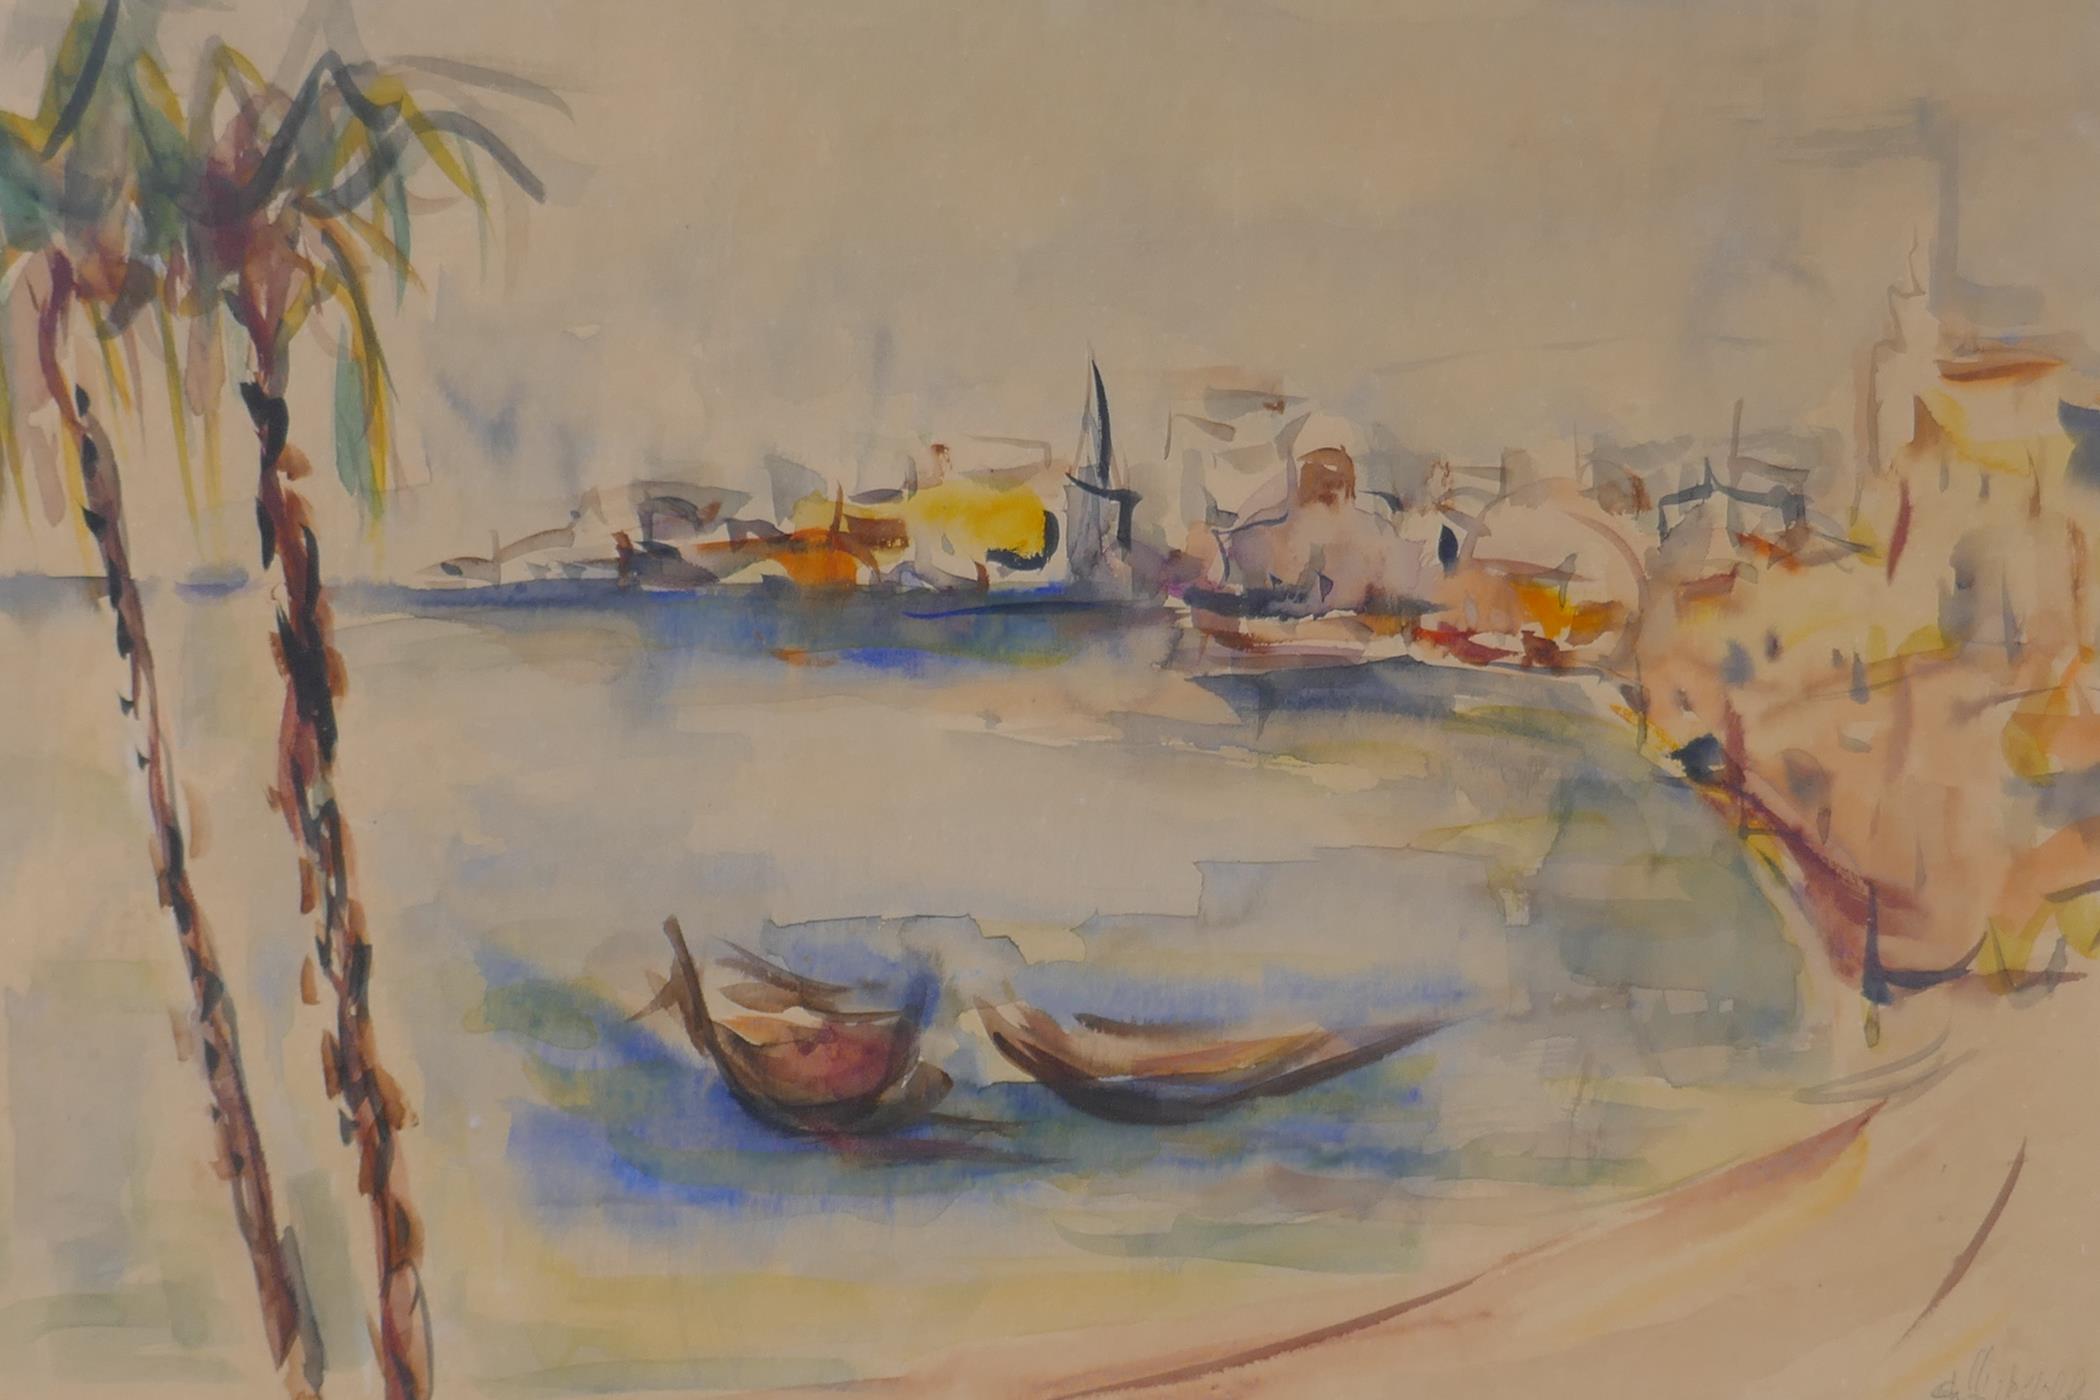 The Port of Jaffa, Israel, indistinctly signed in pencil, watercolour, 50 x 34cm